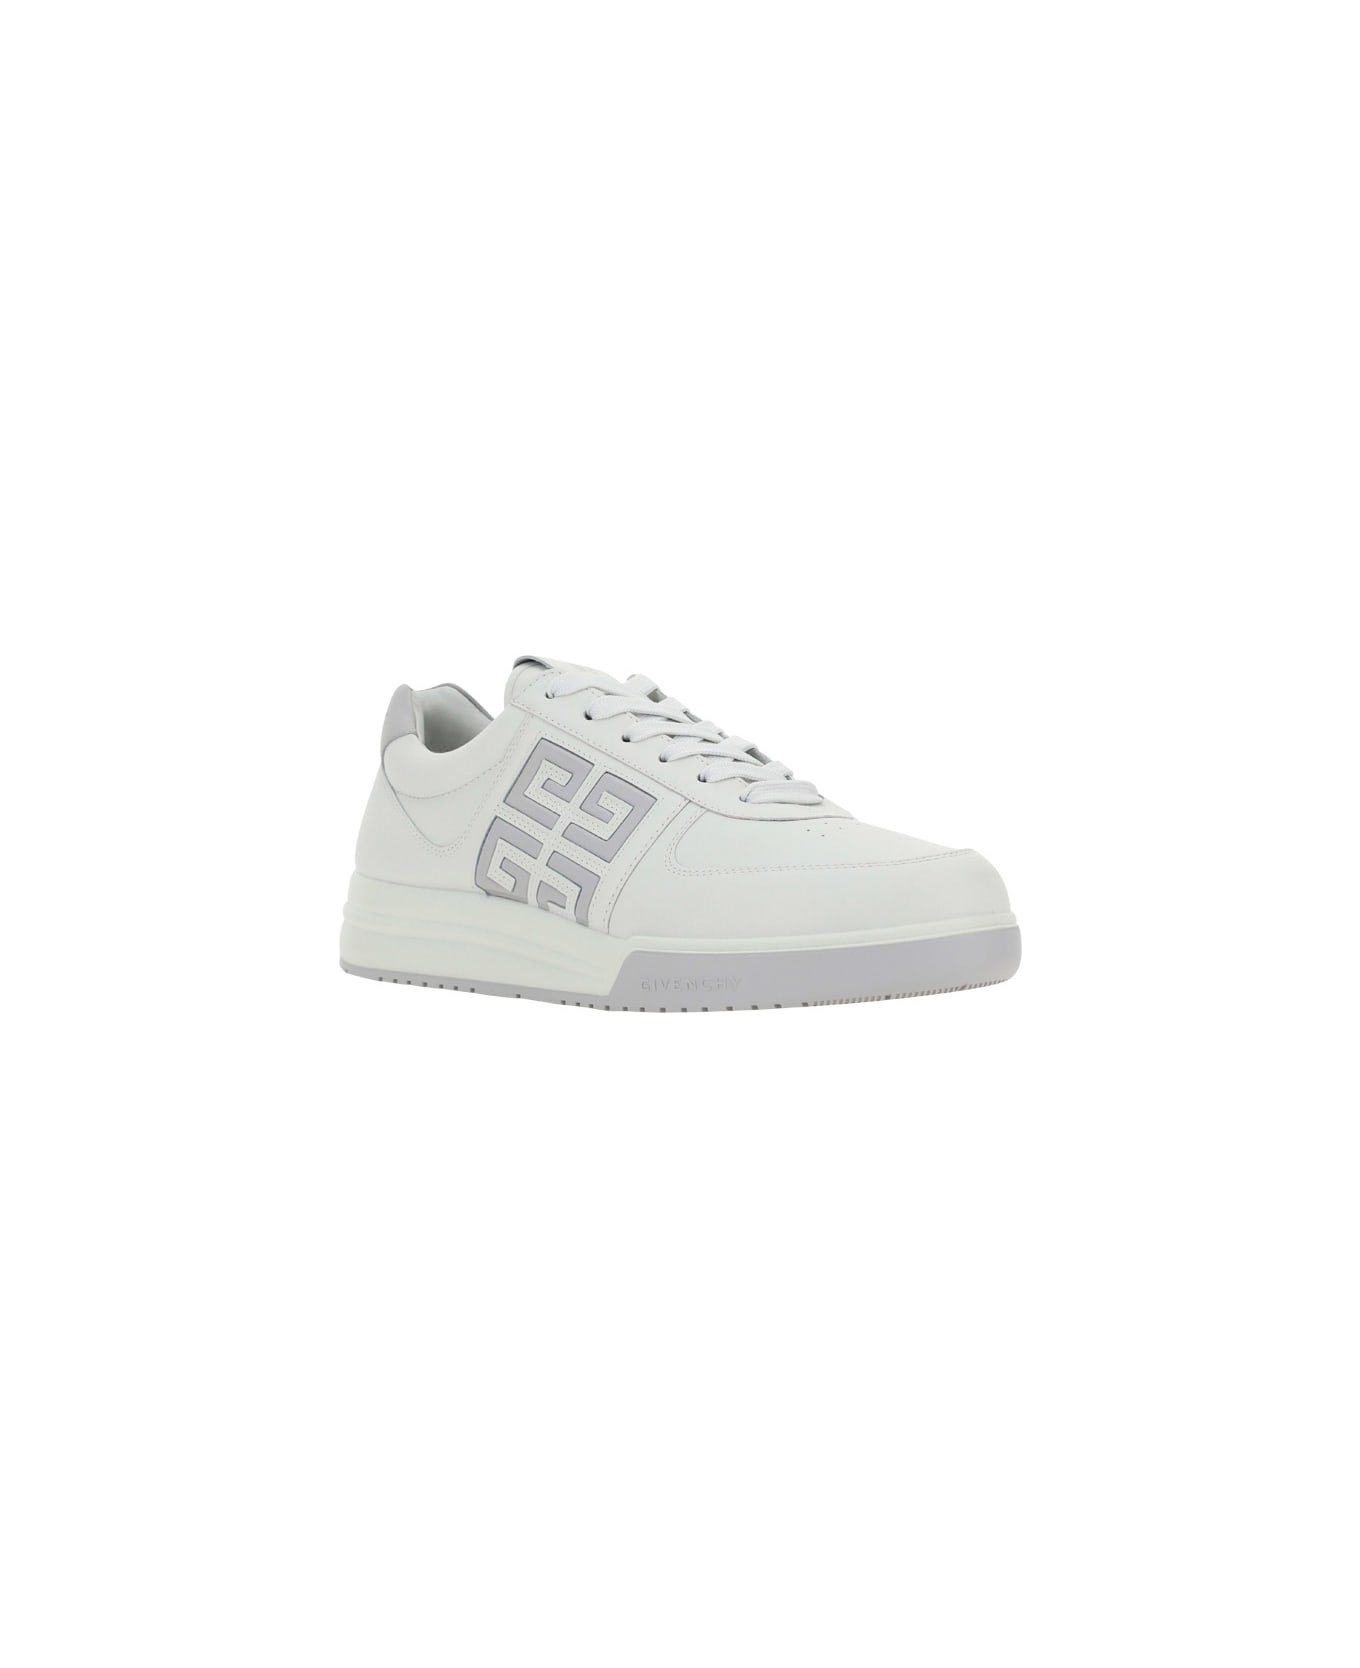 Givenchy 'g4' Sneakers - White/grey